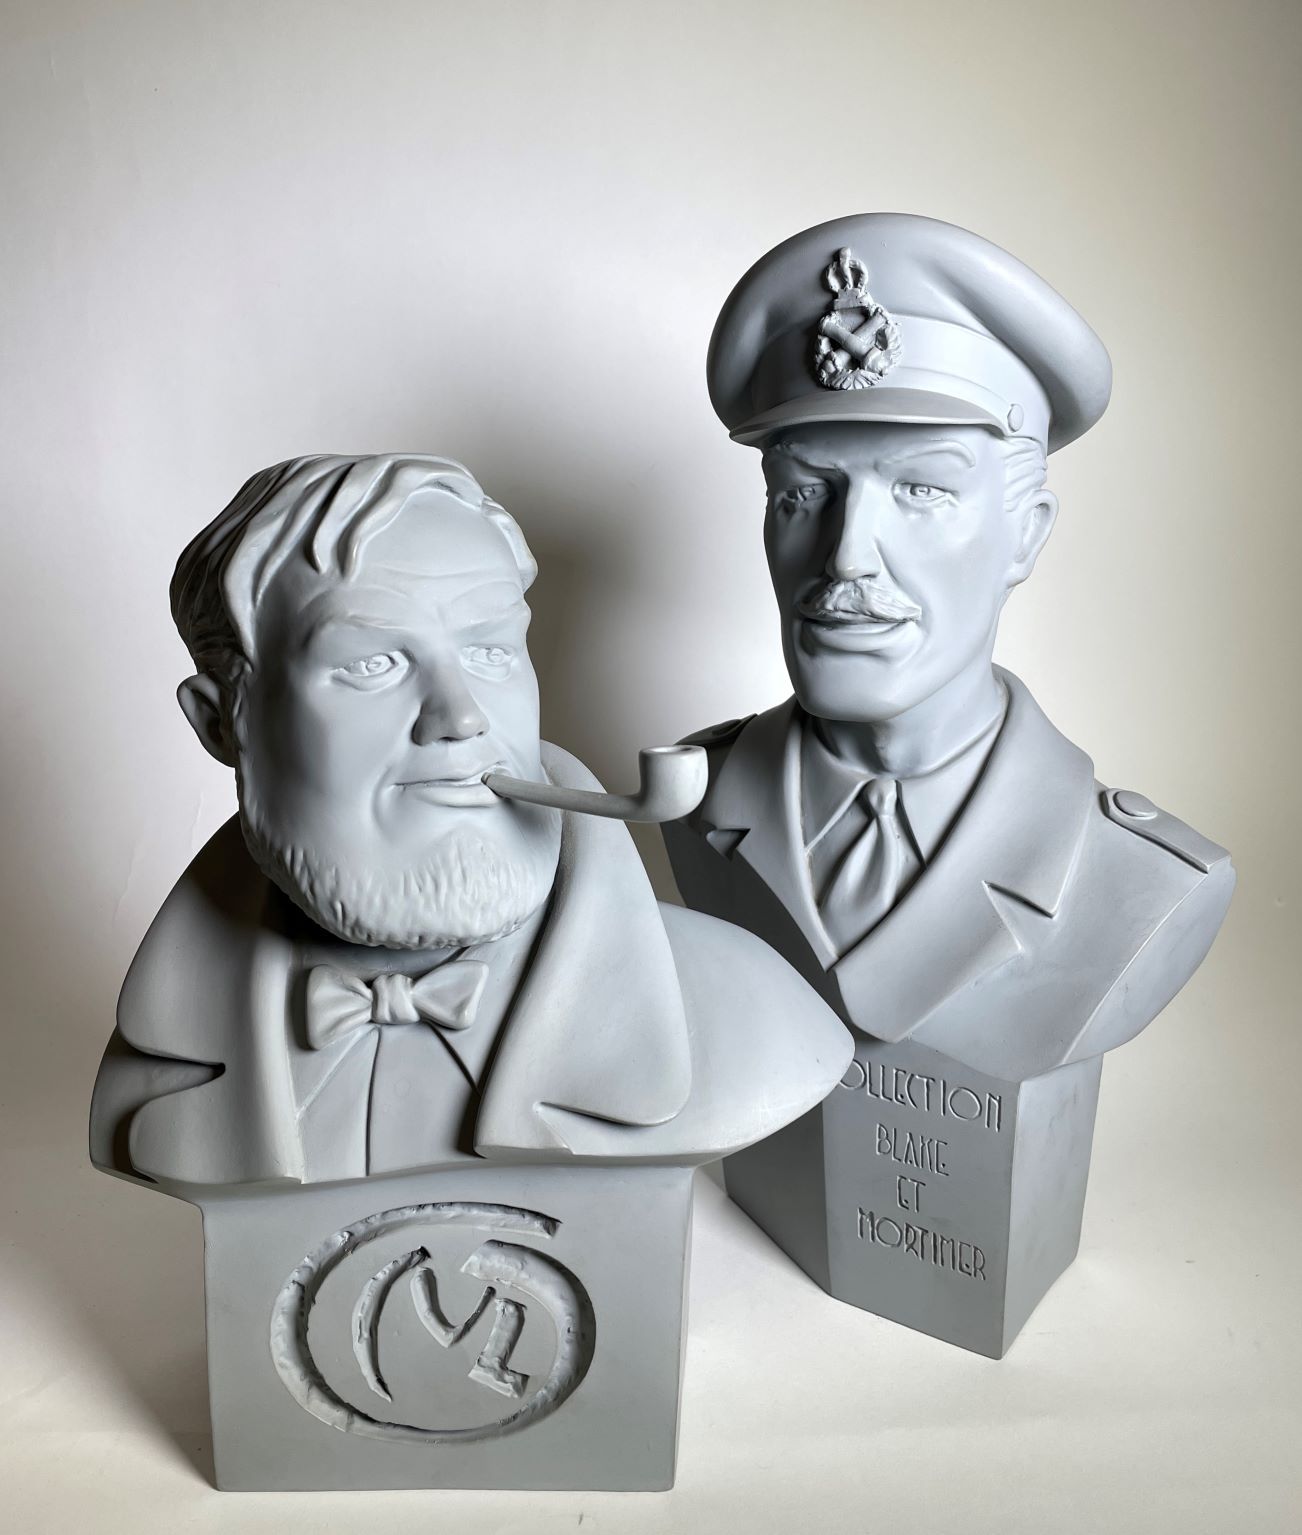 Null 
Jacobs/Blake and Mortimer. Pair of busts in resin, monochrome paint. AGM w&hellip;